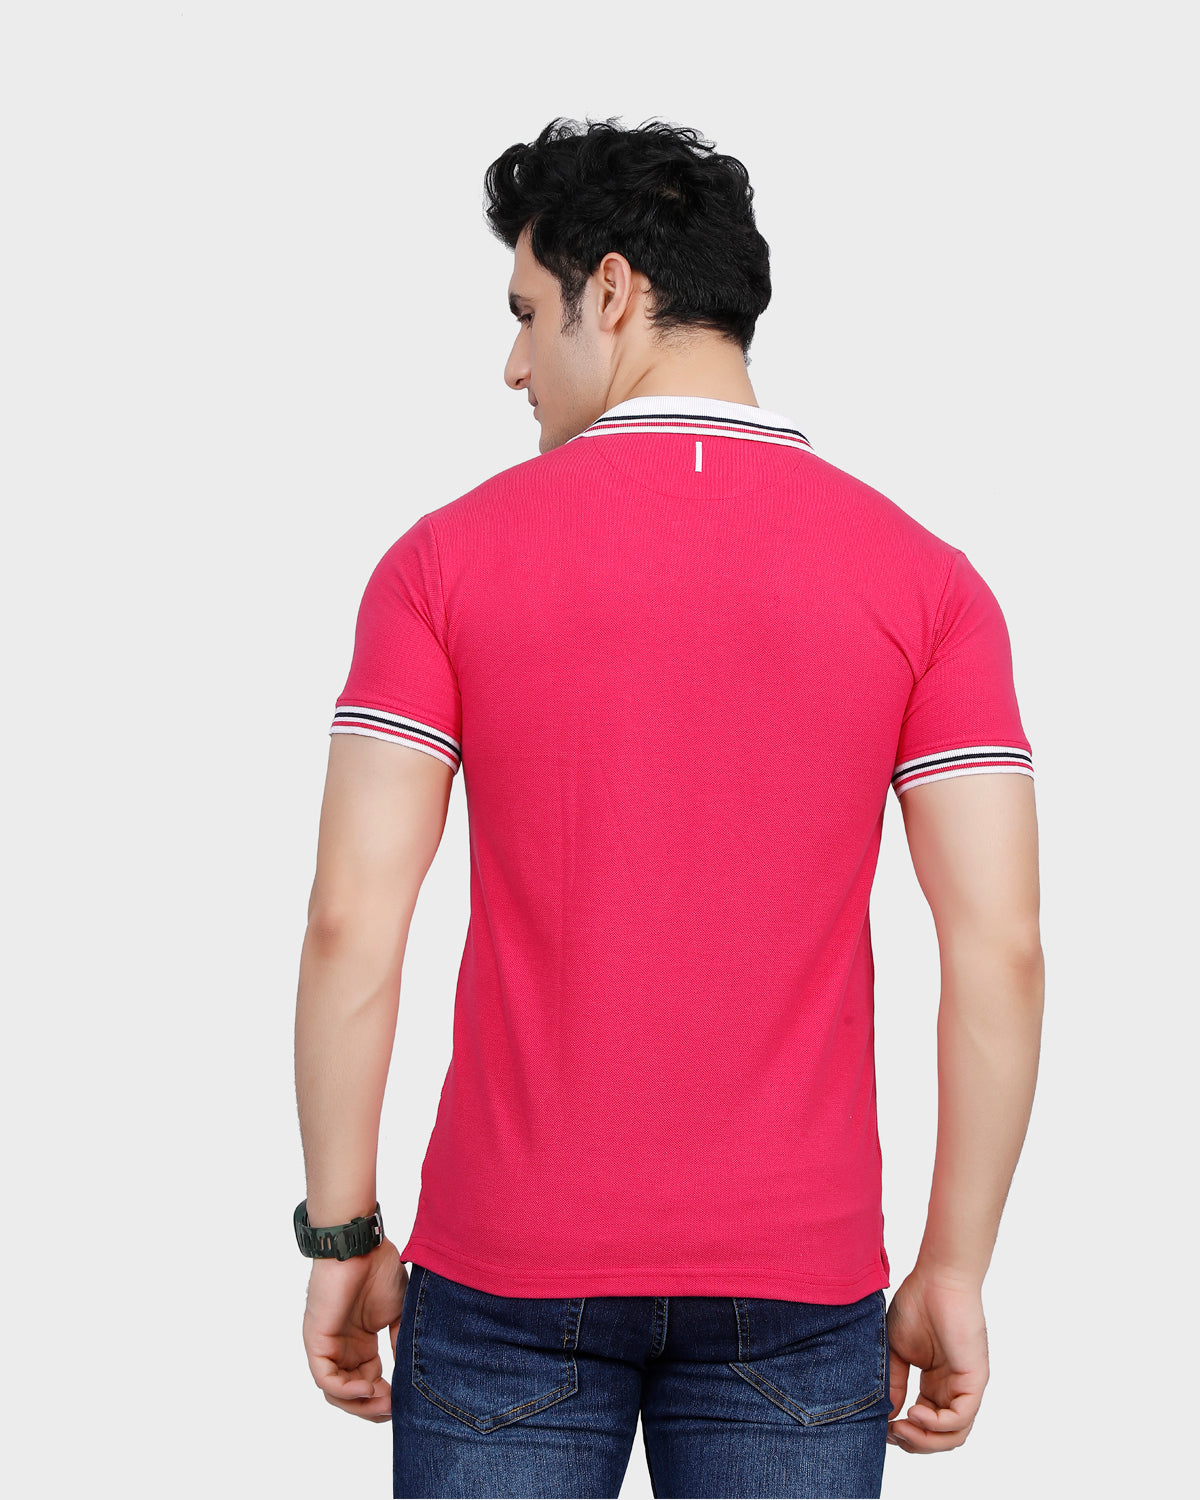 Men's Pink Solid Cotton Polo Shirt